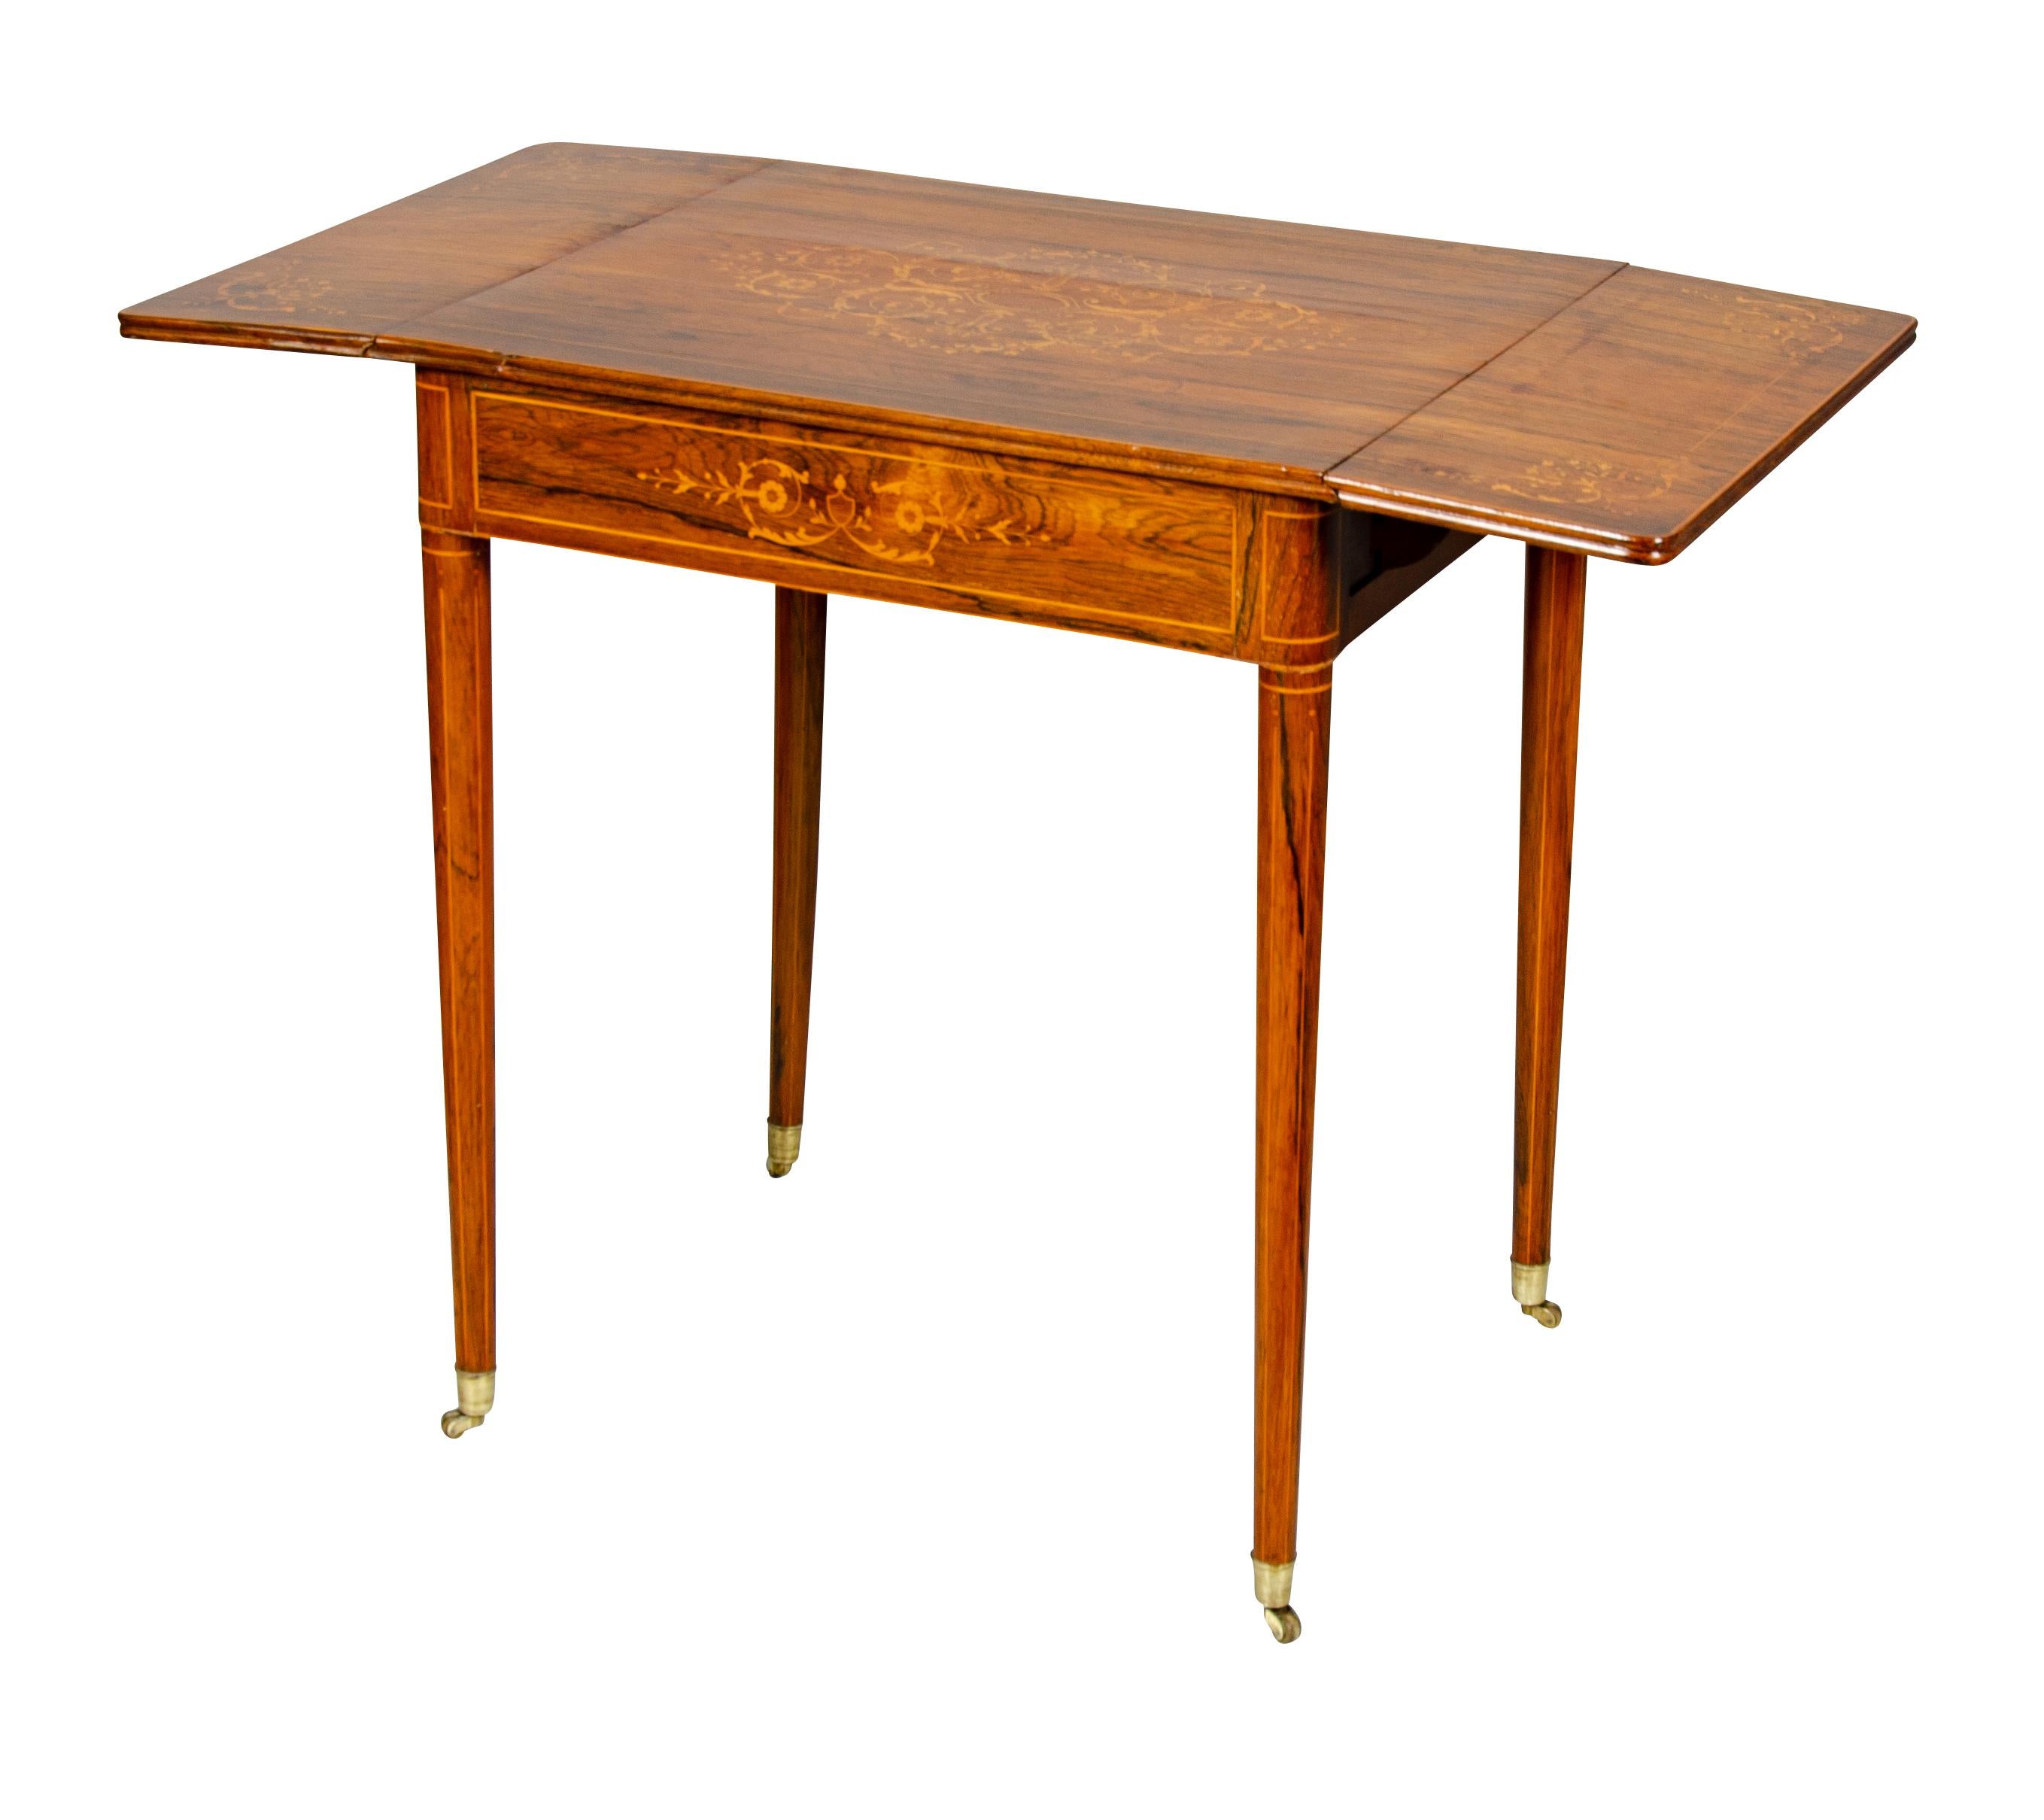 Rectangular top with drop leaves over a drawer raised on circular tapered legs. Provenance; Bellevue Ave Newport family.